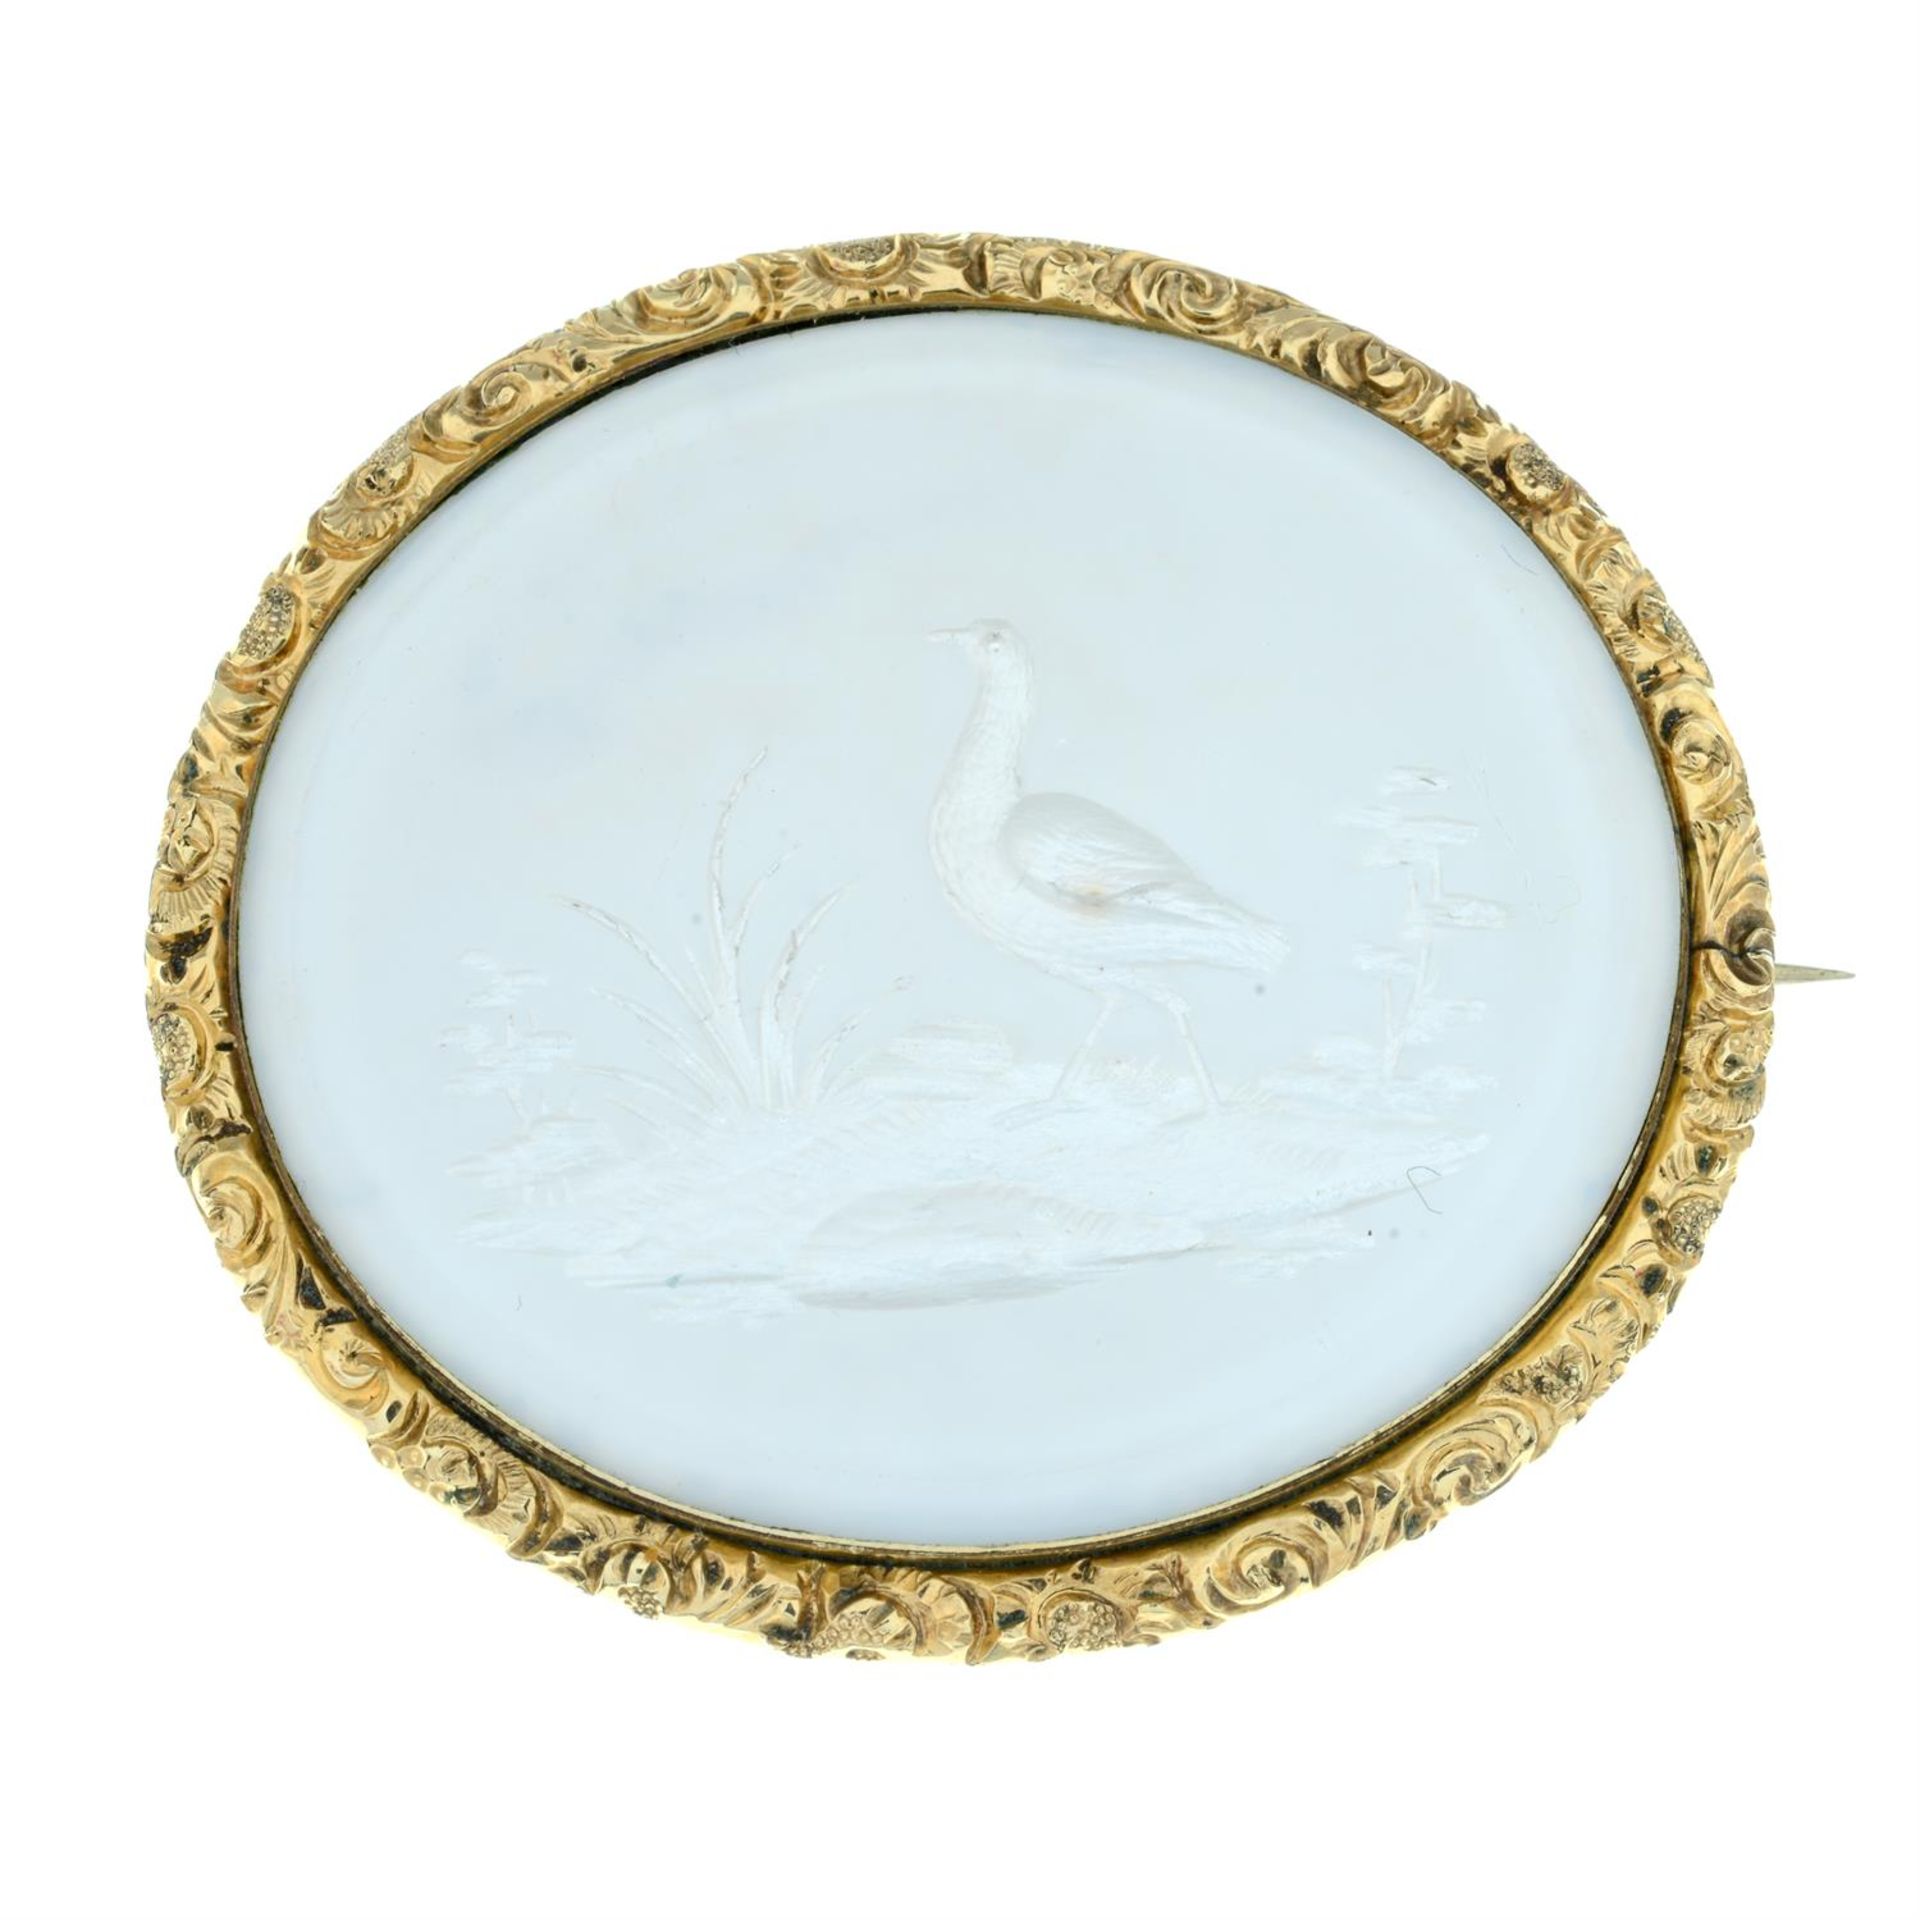 A late 19th century carved mother-of-pearl panel brooch, depicting a bird and flora. - Image 2 of 4